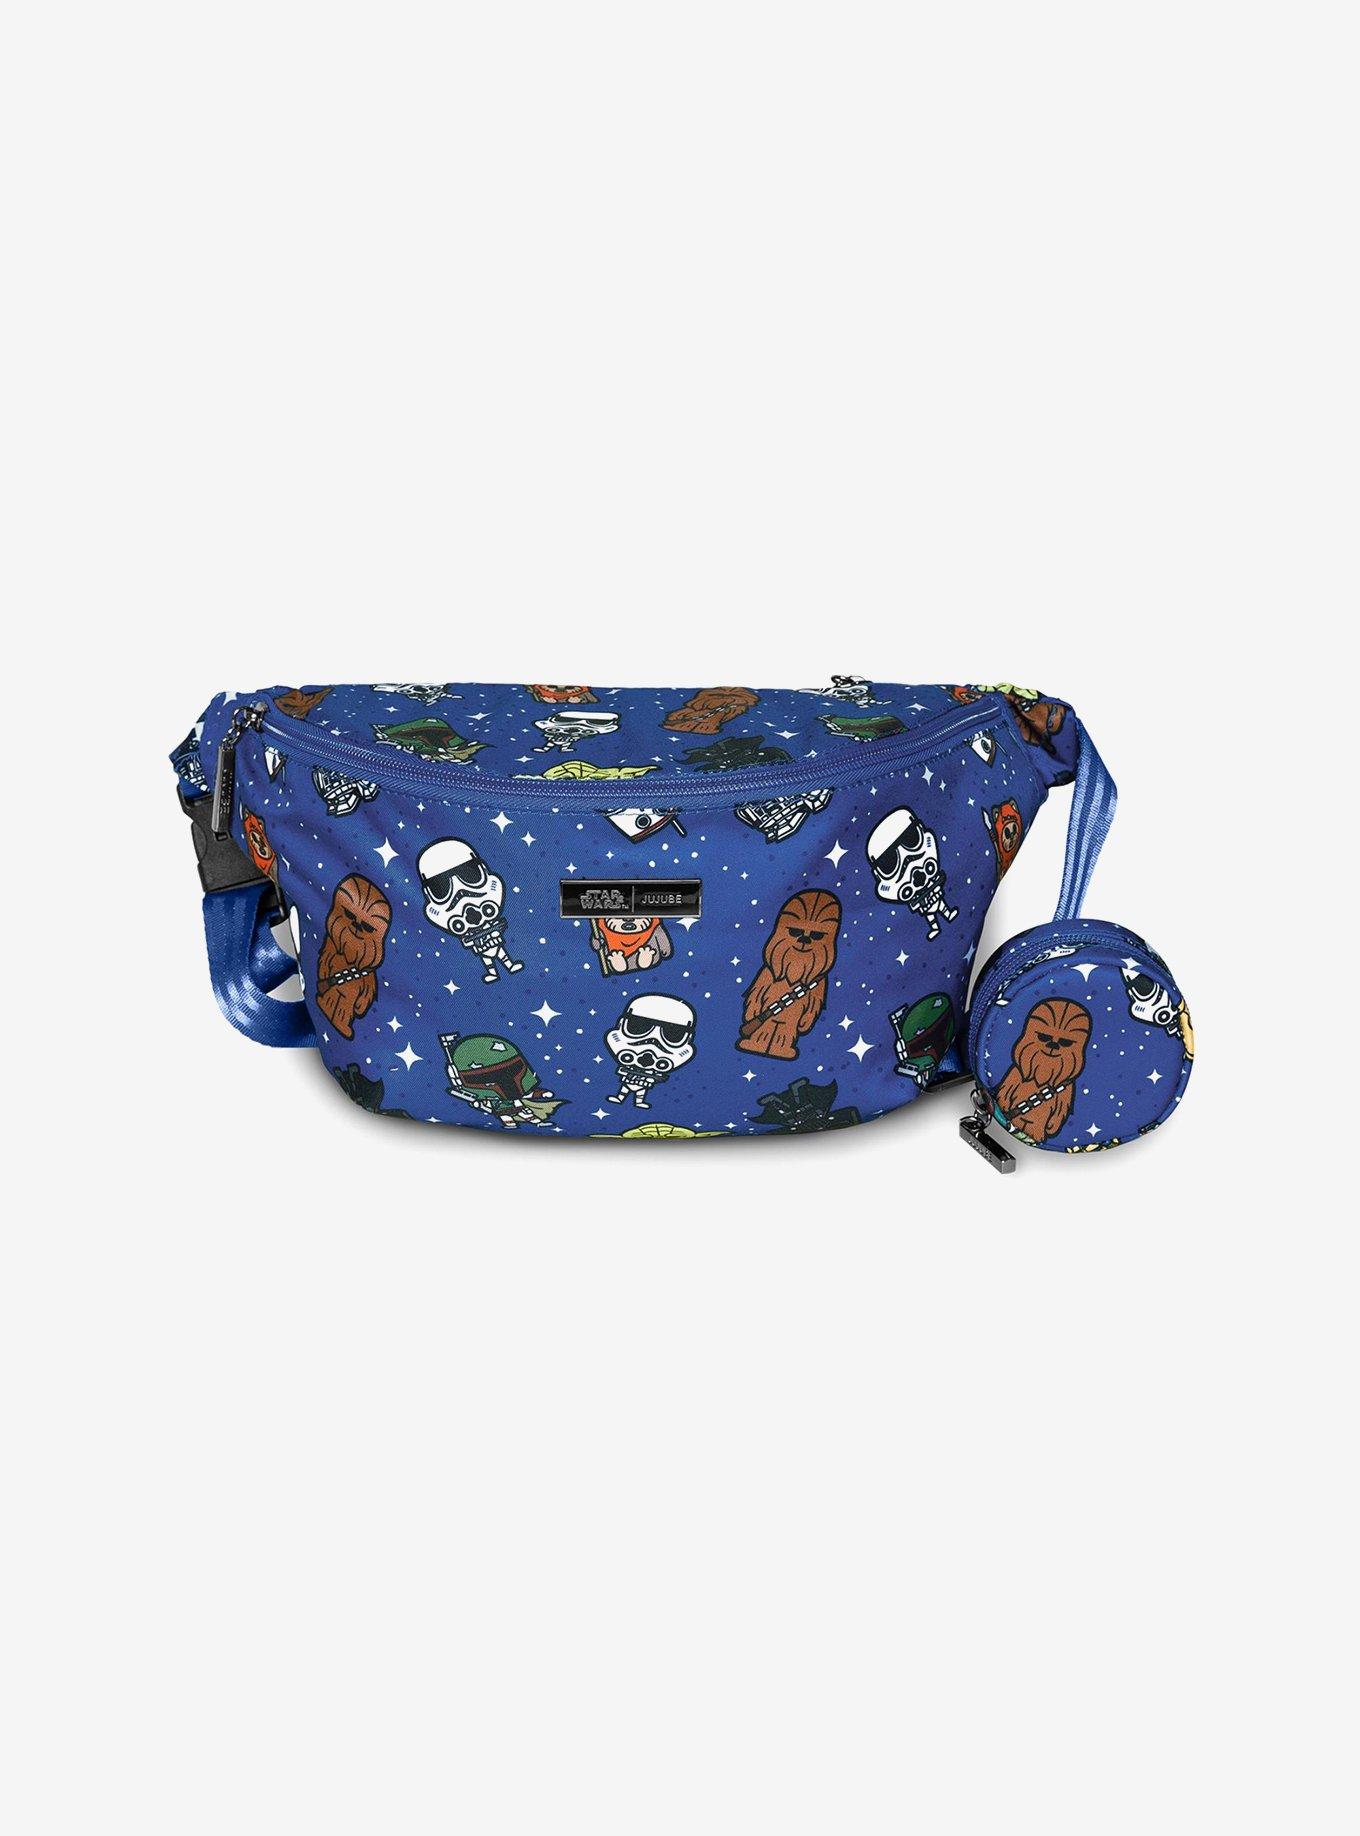 JuJuBe x Star Wars Galaxy of Rivals Park Pack Fanny Pack, , hi-res